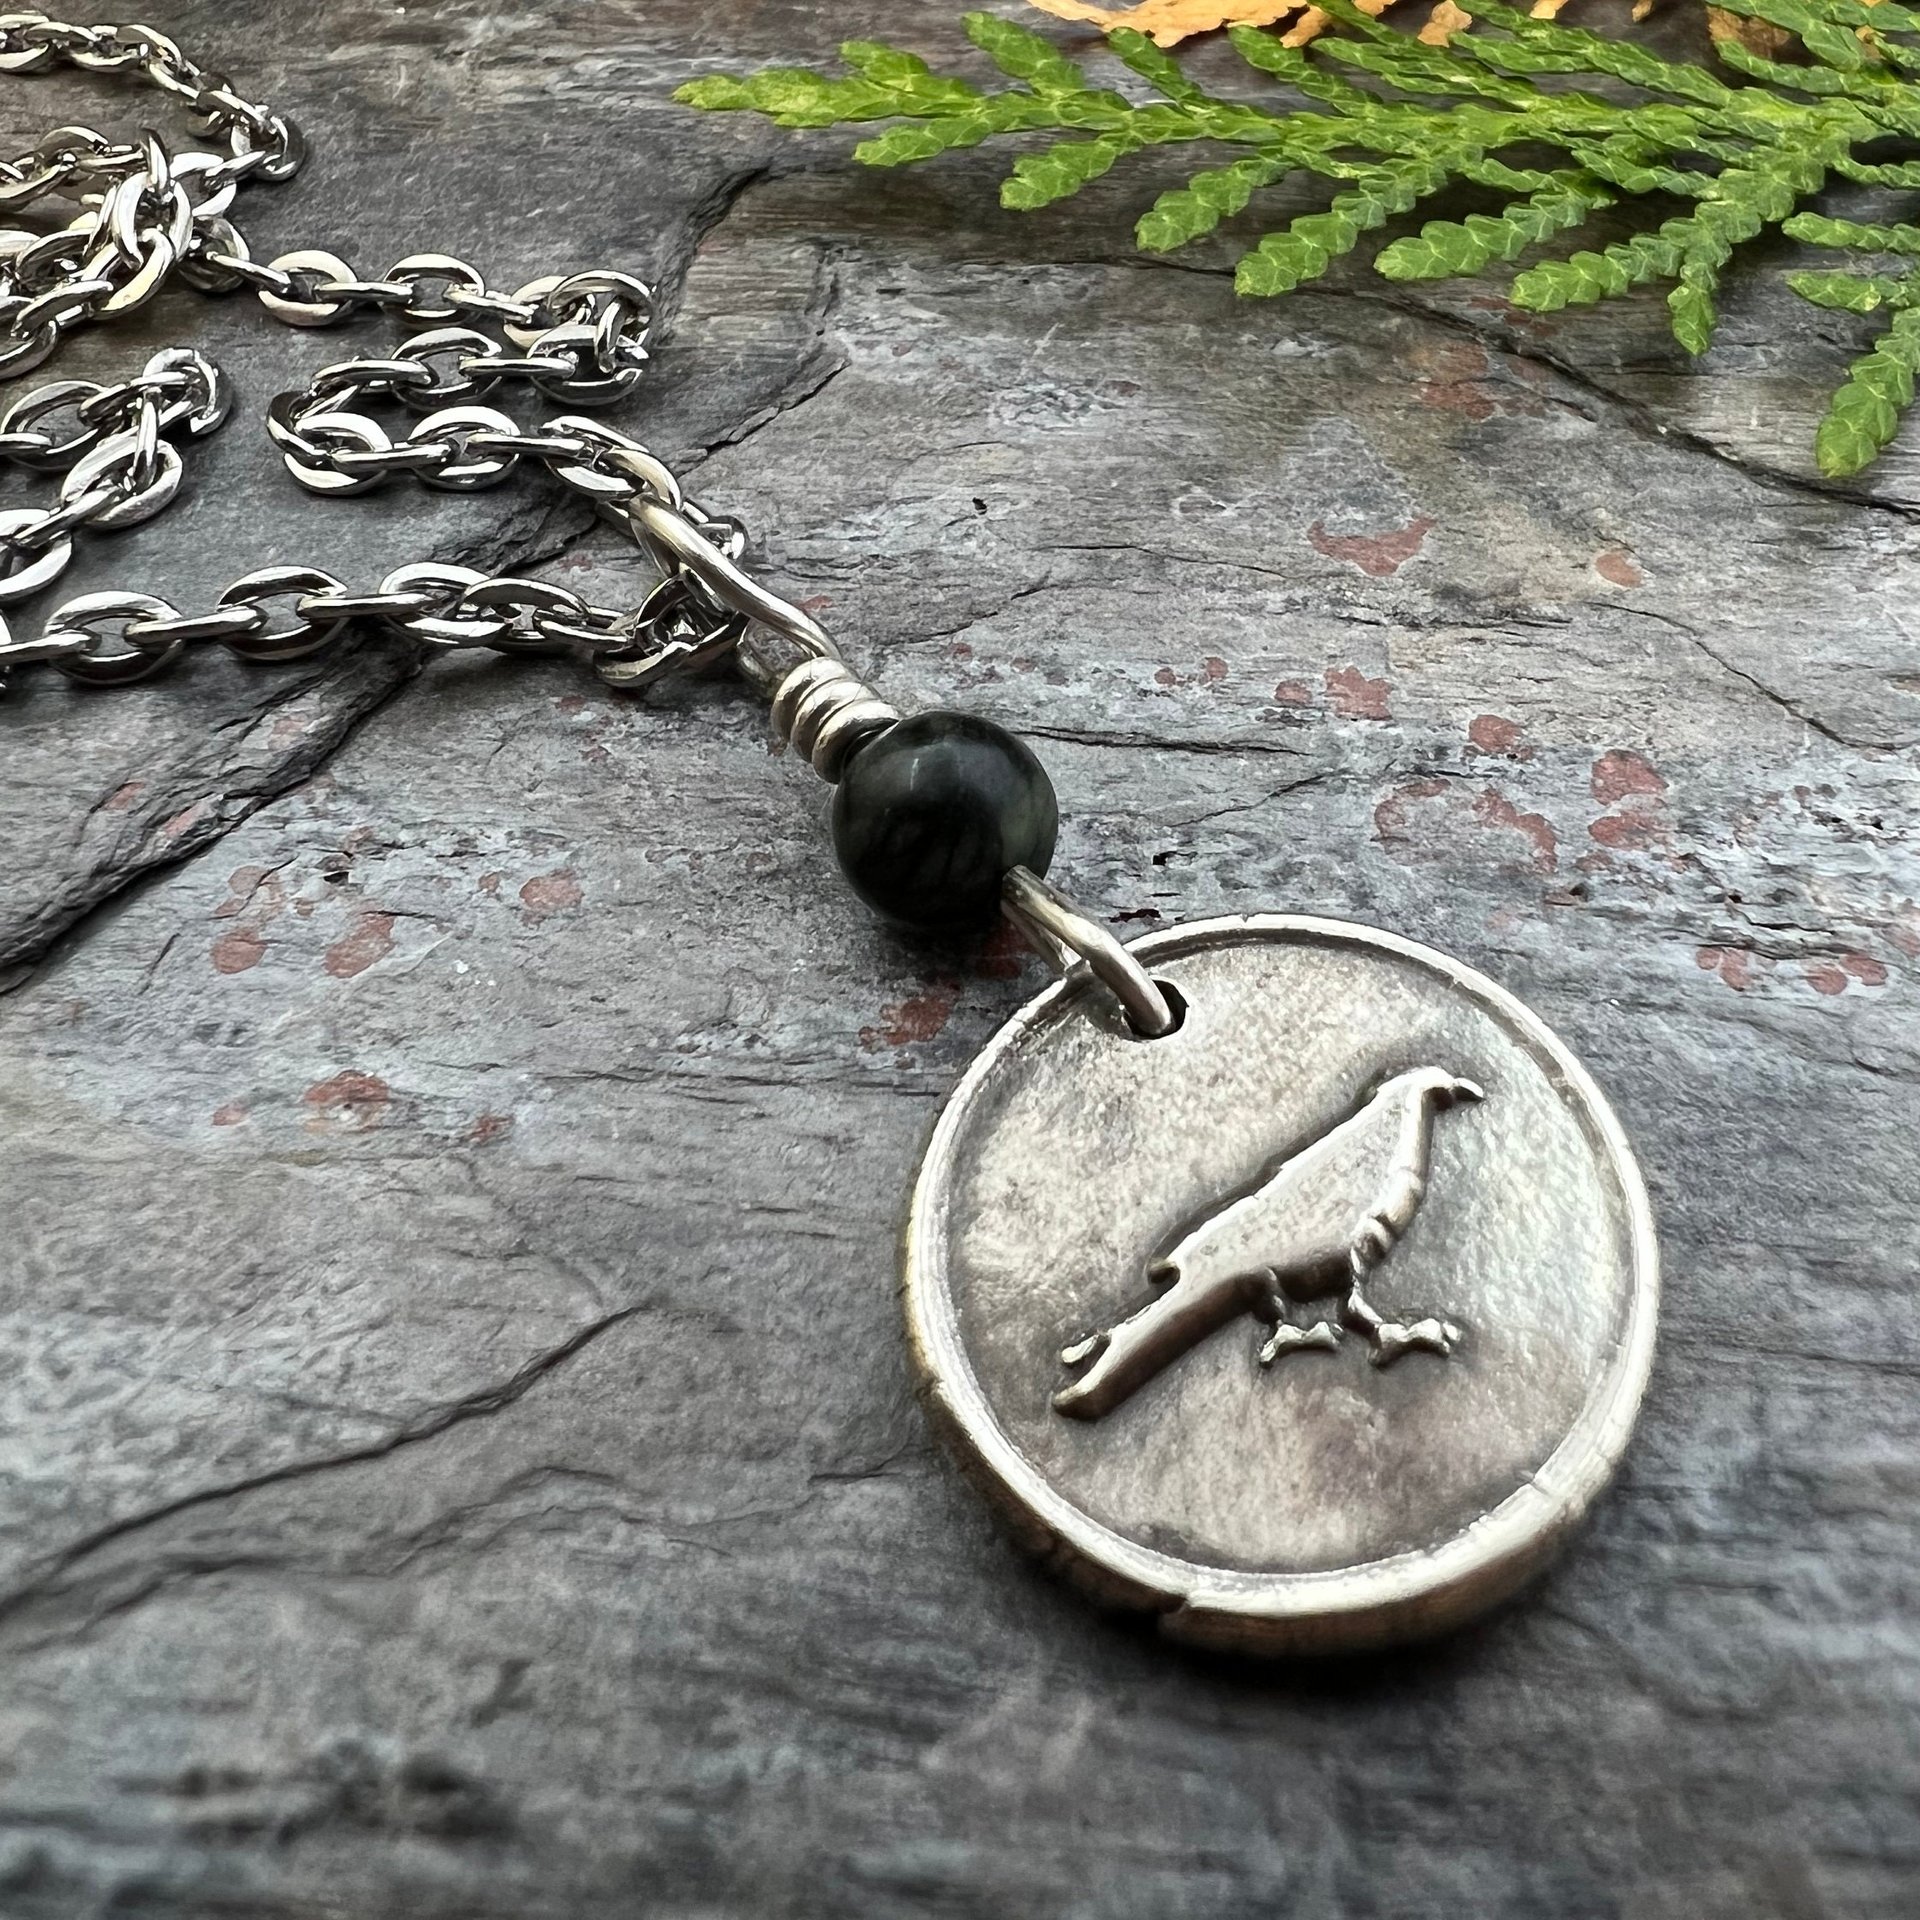 Raven Charm, Sterling Silver, Kilkenny Black Marble, Irish Celtic Jewelry, Wax Seal Charm, Leather & Vegan Cords, Stainless Chains, Handmade